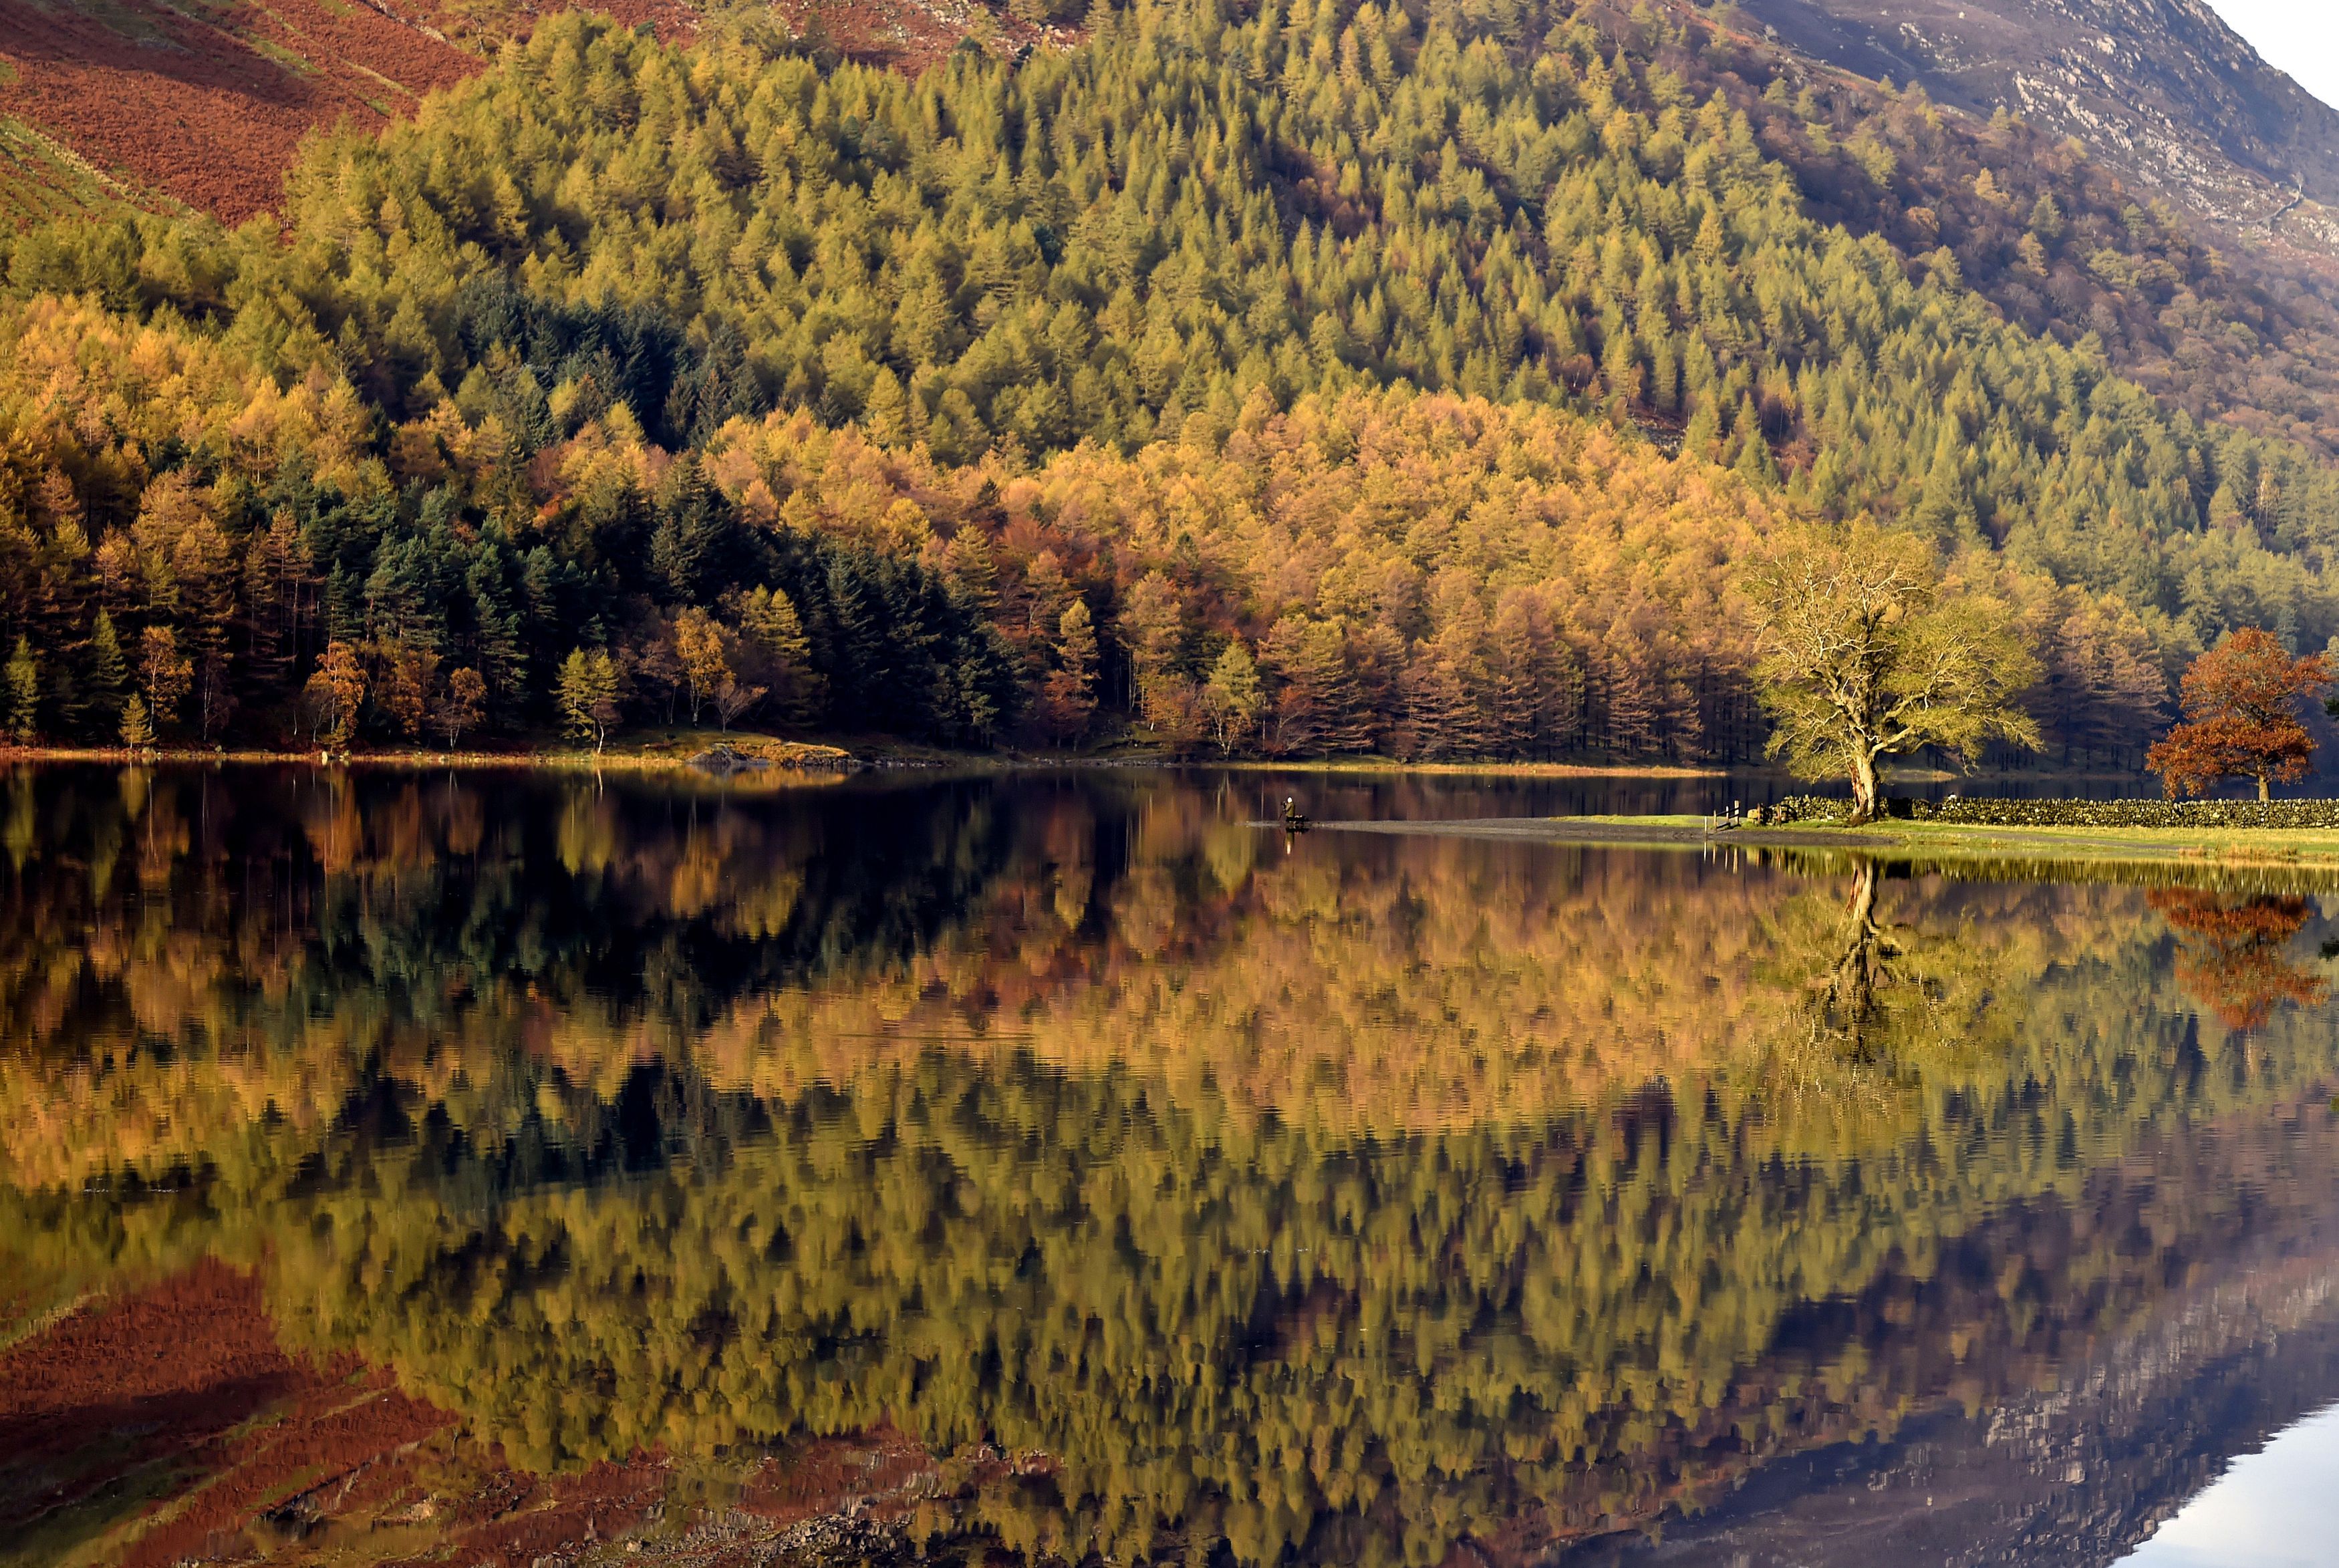 Autumn reflections are seen on Lake Buttermere